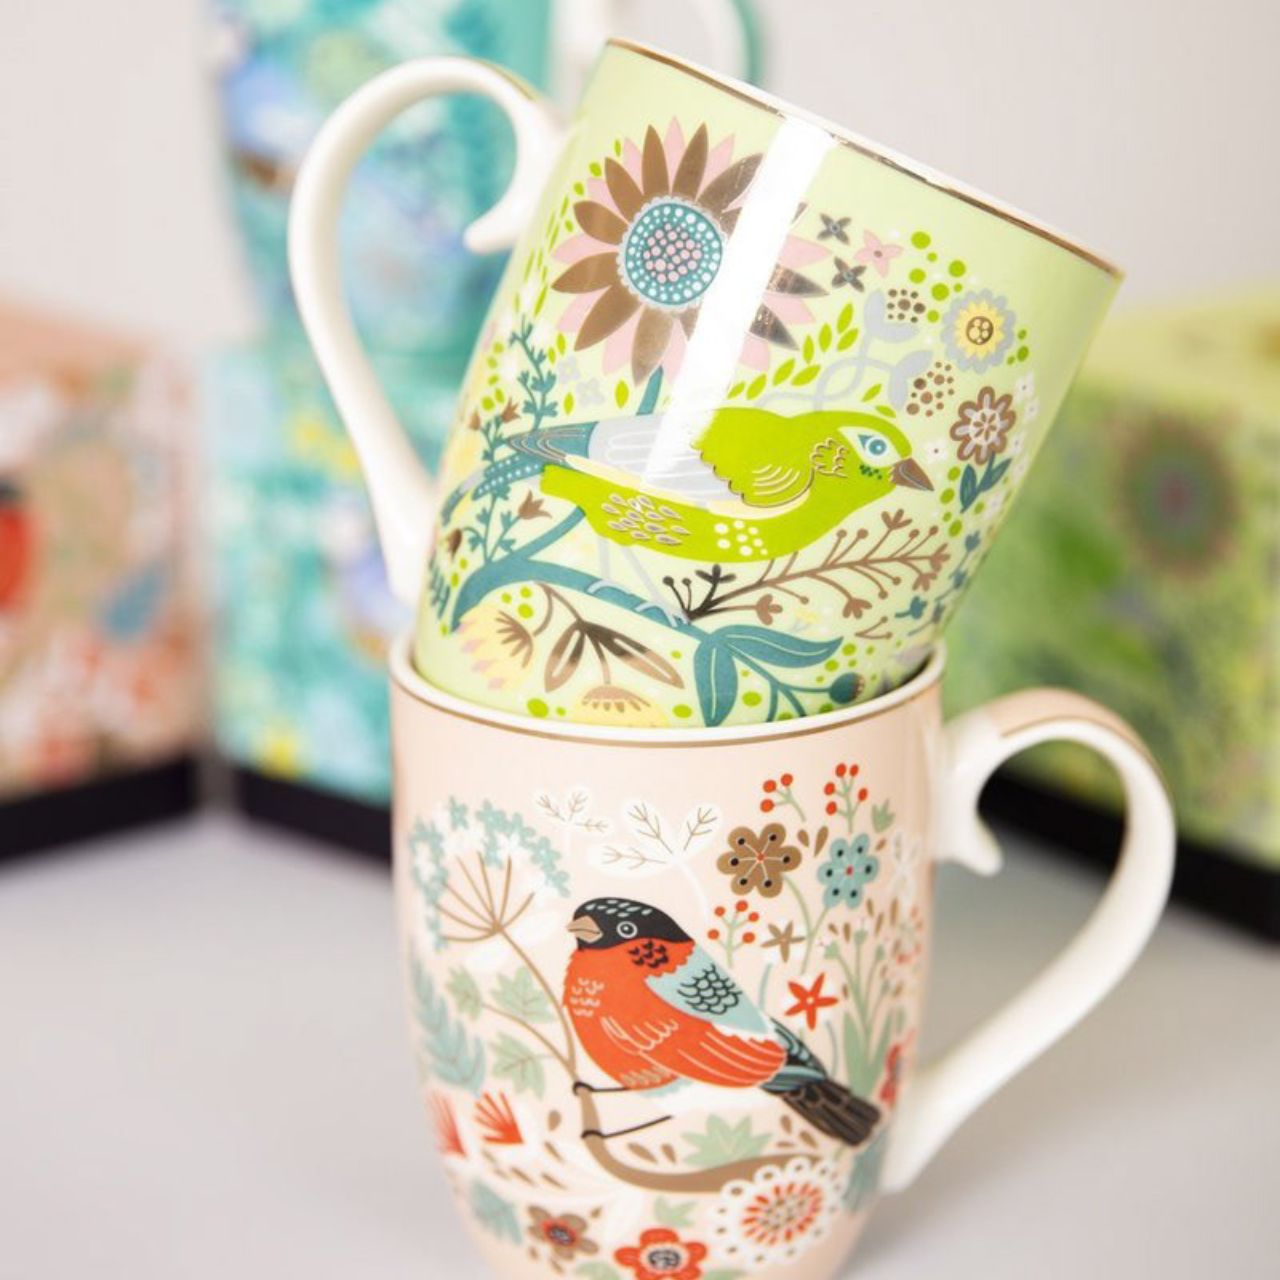 Tipperary Crystal Birdy Set Of 6 Mugs In Hat Box  The Birdy Collection is a series of 6 exclusively commissioned illustrations inspired by native Irish birds; Bullfinch, Goldfinch, Blue tit, Greenfinch, Kingfisher and Robin.